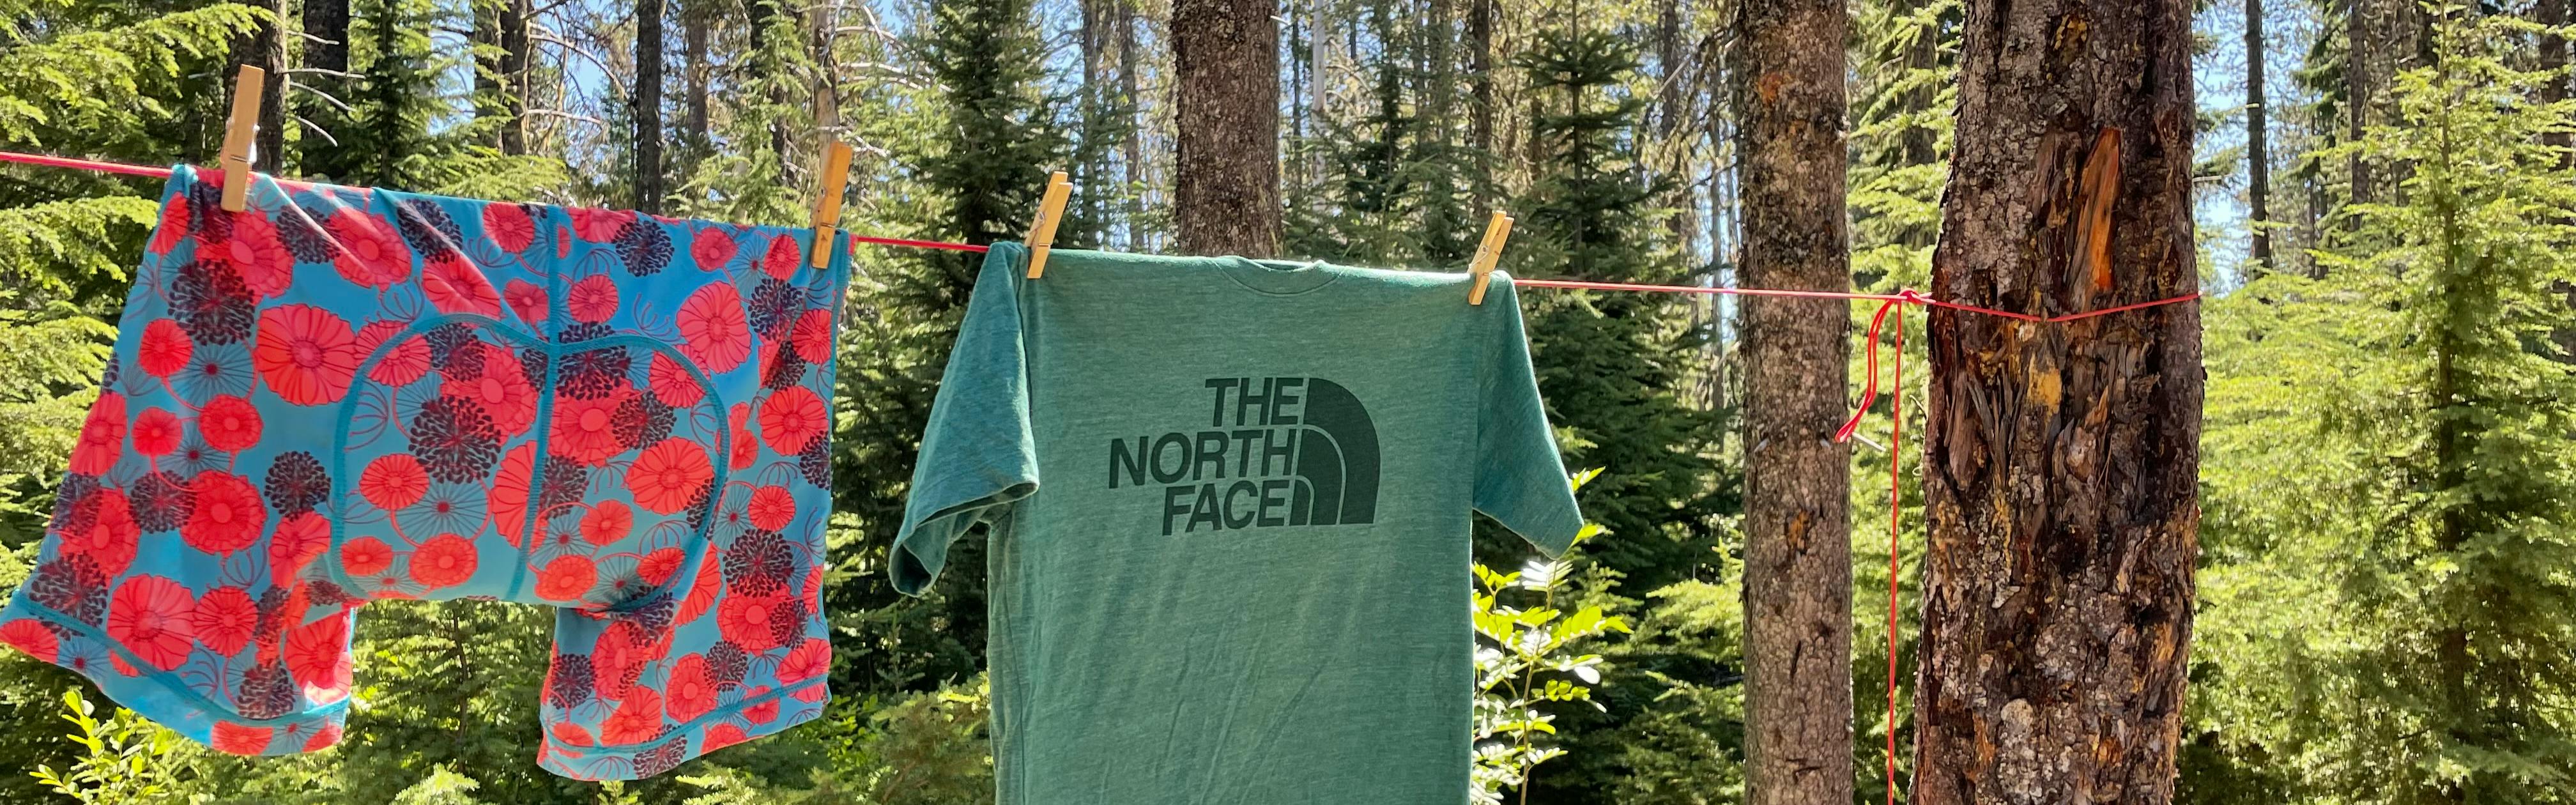 A pair of red and blue boxer briefs and a green North Face t-shirt are hung by clothespins on a line attached to a pine tree. 